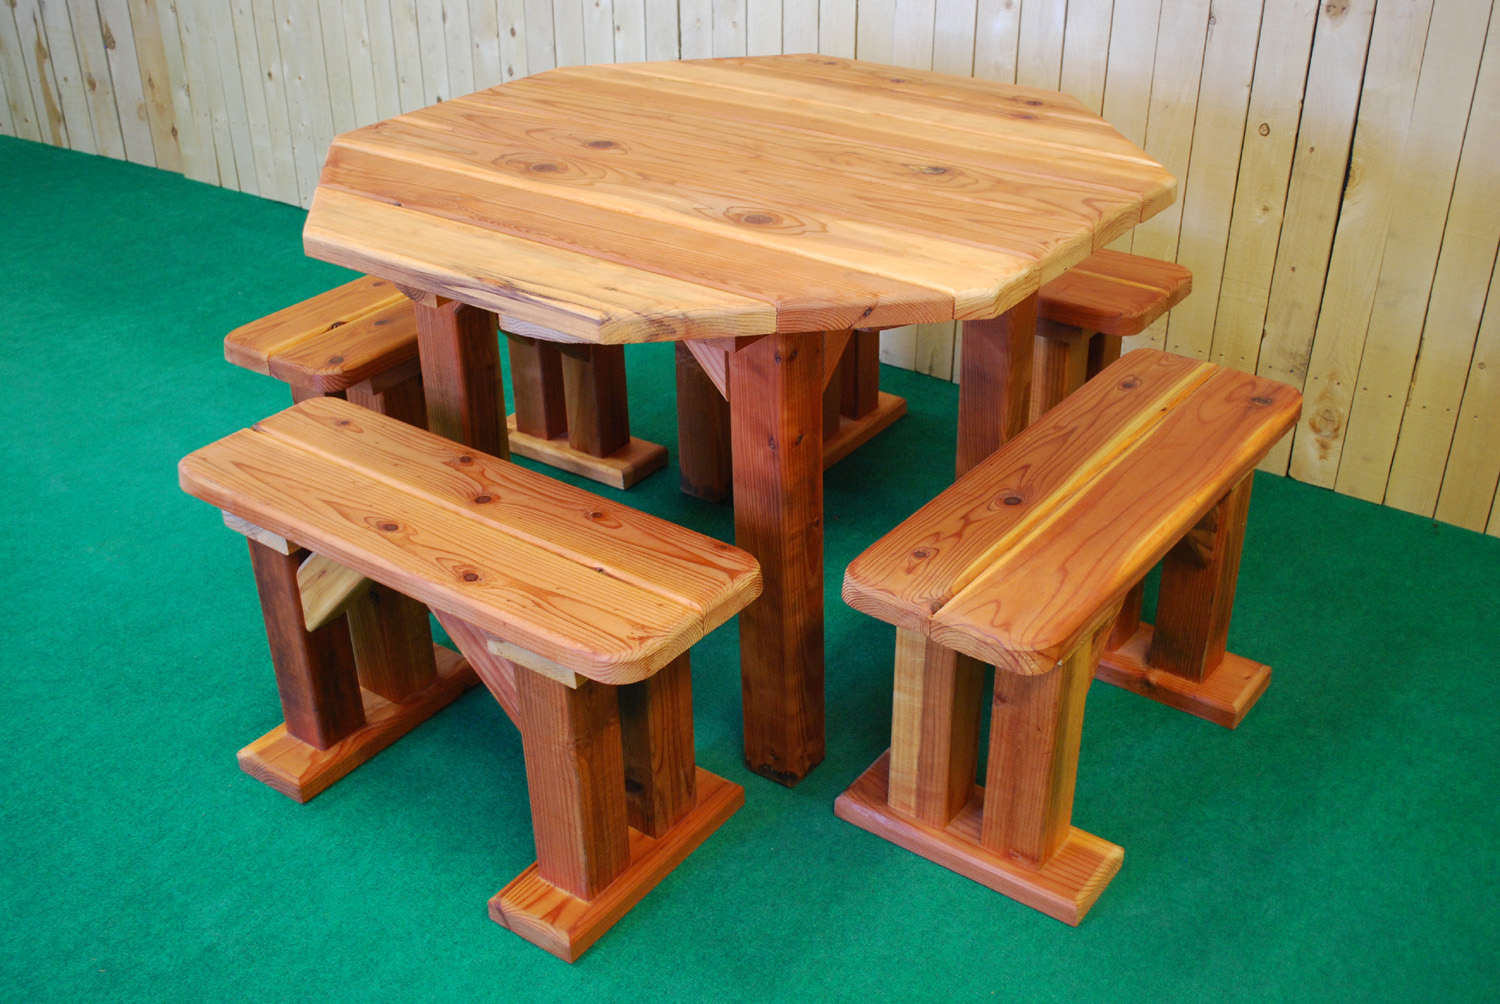 48" redwood octagon picnic table